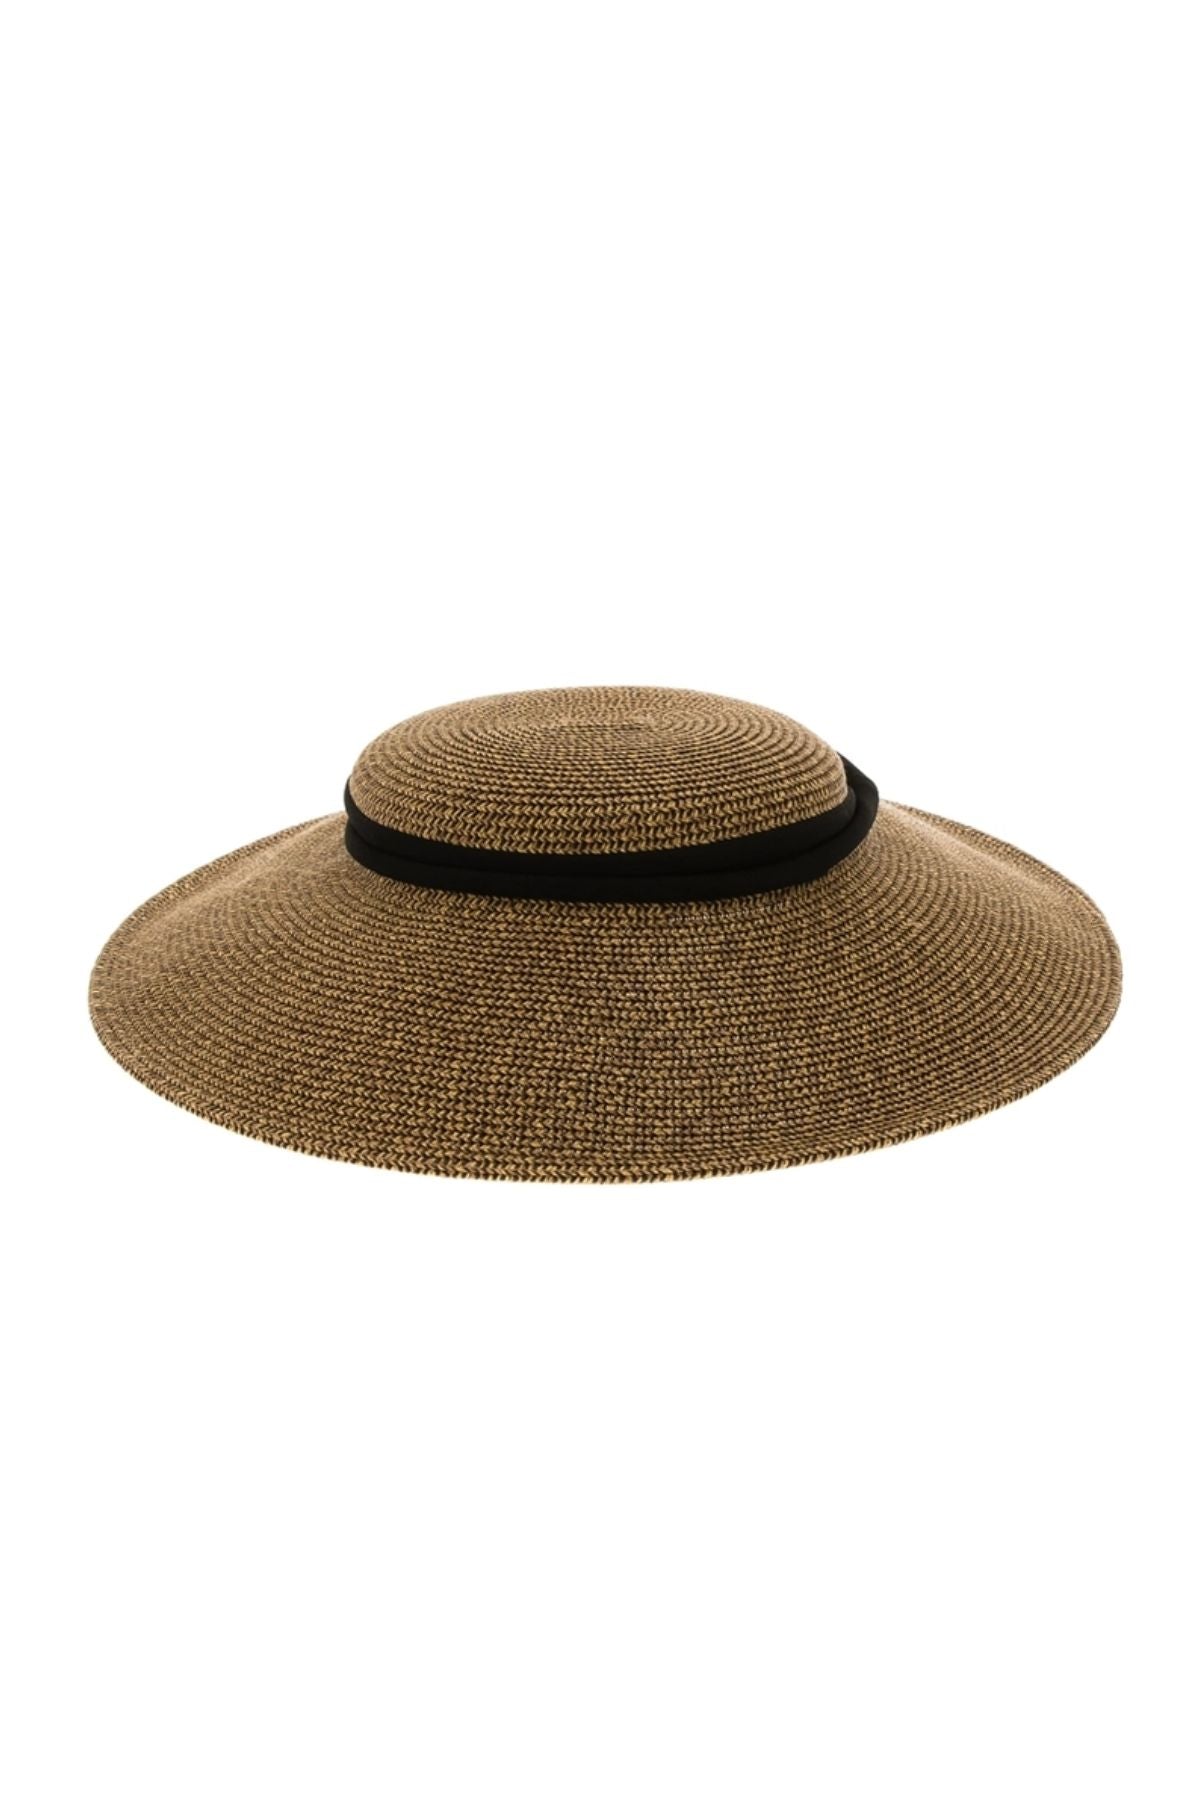 Black collapsible straw sun hat